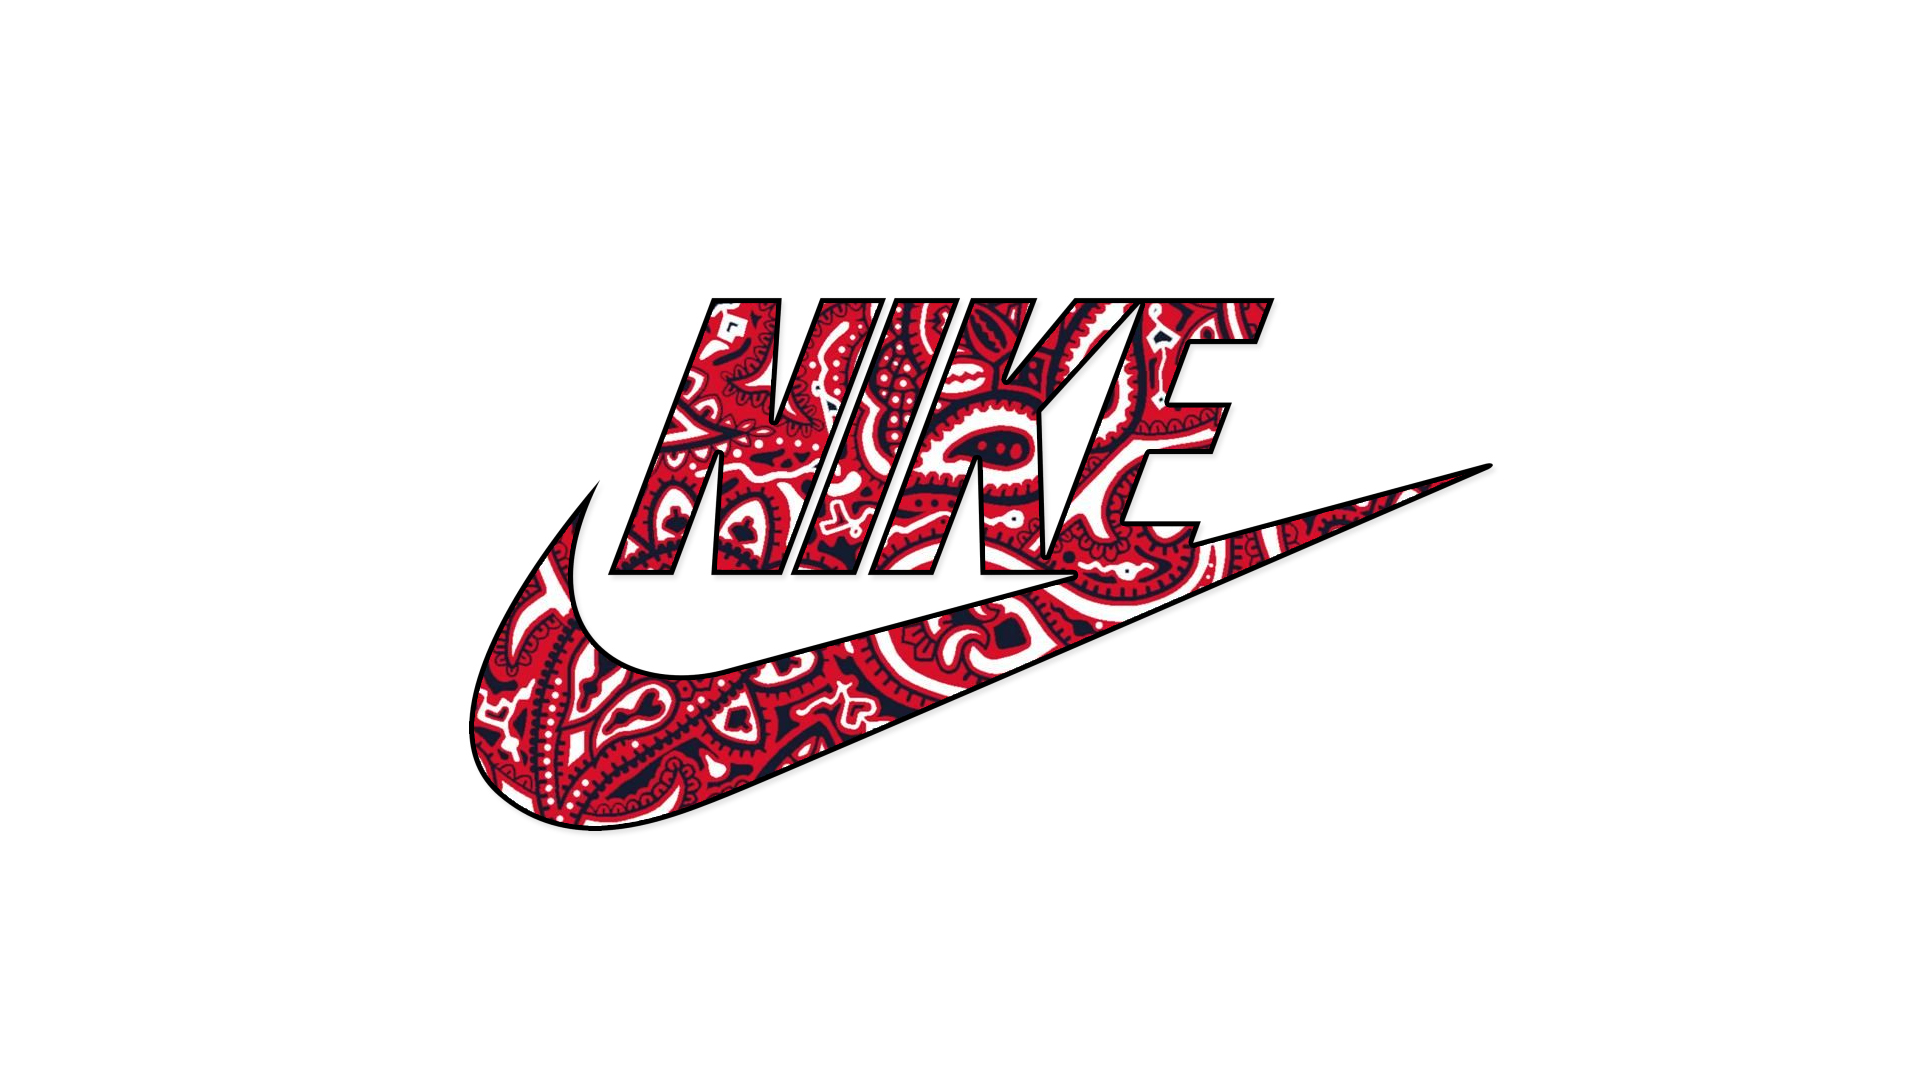 Nike Bloods Gang Gang Related White Red Black Logo Outline Photoshop 1920x1080